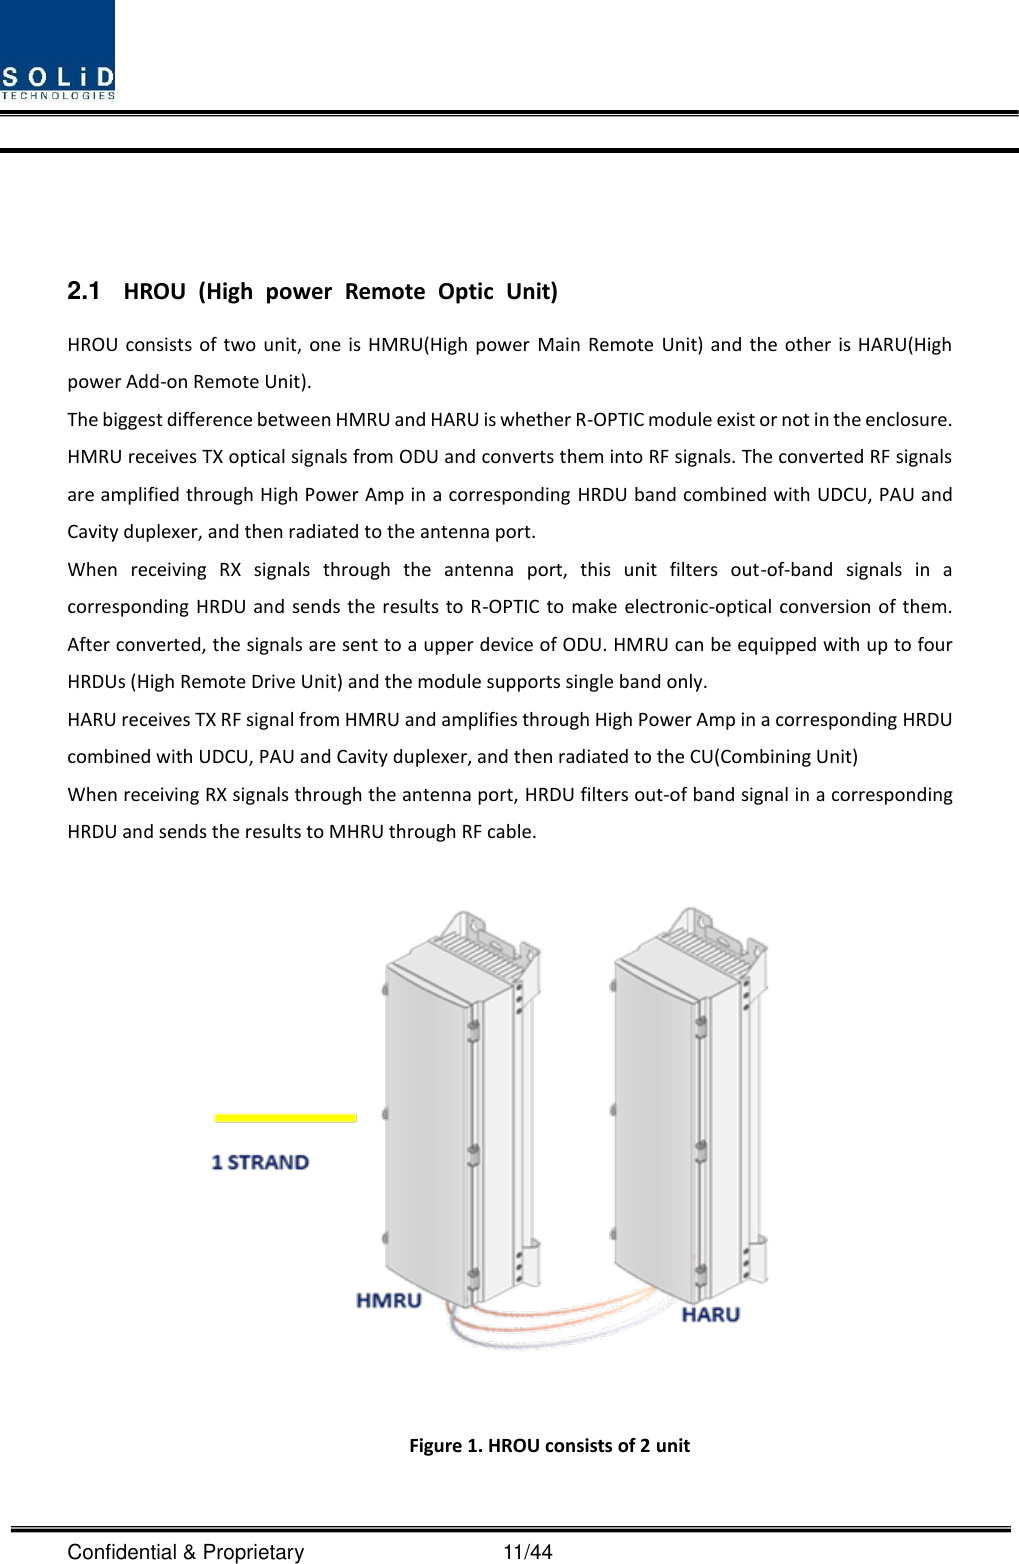  Confidential &amp; Proprietary                                      11/44    2.1  HROU  (High  power  Remote  Optic  Unit) HROU consists of two  unit, one is HMRU(High power Main Remote Unit) and the other is HARU(High power Add-on Remote Unit). The biggest difference between HMRU and HARU is whether R-OPTIC module exist or not in the enclosure. HMRU receives TX optical signals from ODU and converts them into RF signals. The converted RF signals are amplified through High Power Amp in a corresponding HRDU band combined with UDCU, PAU and Cavity duplexer, and then radiated to the antenna port. When  receiving  RX  signals  through  the  antenna  port,  this  unit  filters  out-of-band  signals  in  a corresponding HRDU and sends the results to R-OPTIC to make electronic-optical conversion of them. After converted, the signals are sent to a upper device of ODU. HMRU can be equipped with up to four HRDUs (High Remote Drive Unit) and the module supports single band only. HARU receives TX RF signal from HMRU and amplifies through High Power Amp in a corresponding HRDU combined with UDCU, PAU and Cavity duplexer, and then radiated to the CU(Combining Unit) When receiving RX signals through the antenna port, HRDU filters out-of band signal in a corresponding HRDU and sends the results to MHRU through RF cable.     Figure 1. HROU consists of 2 unit 